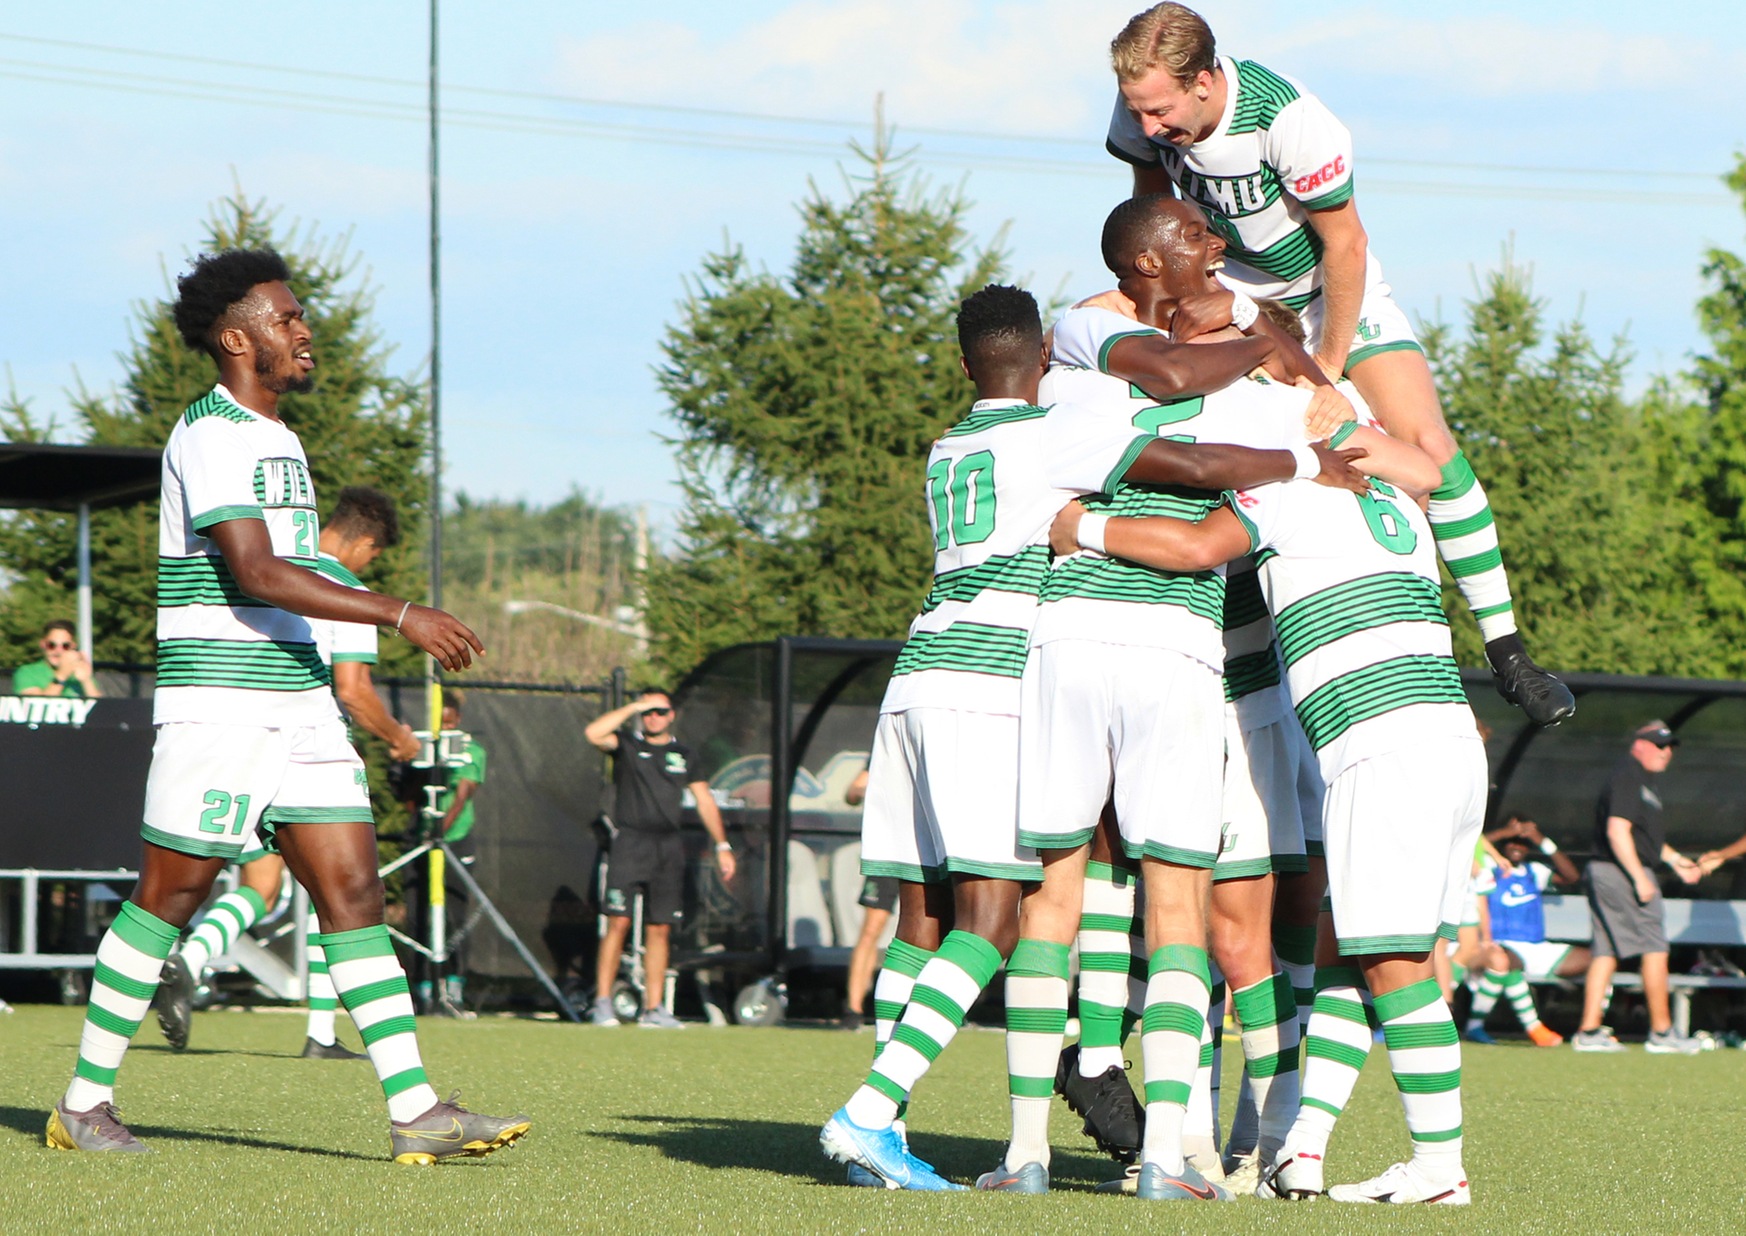 Wilmington University players celebrate Joe Bell's winning goal against Southern New Hampshire University during their NCAA Division II Men's soccer match at the Wilmington University Sports Complex in Newark, Delaware,  September 18, 2019 photo by Emma Whitesel